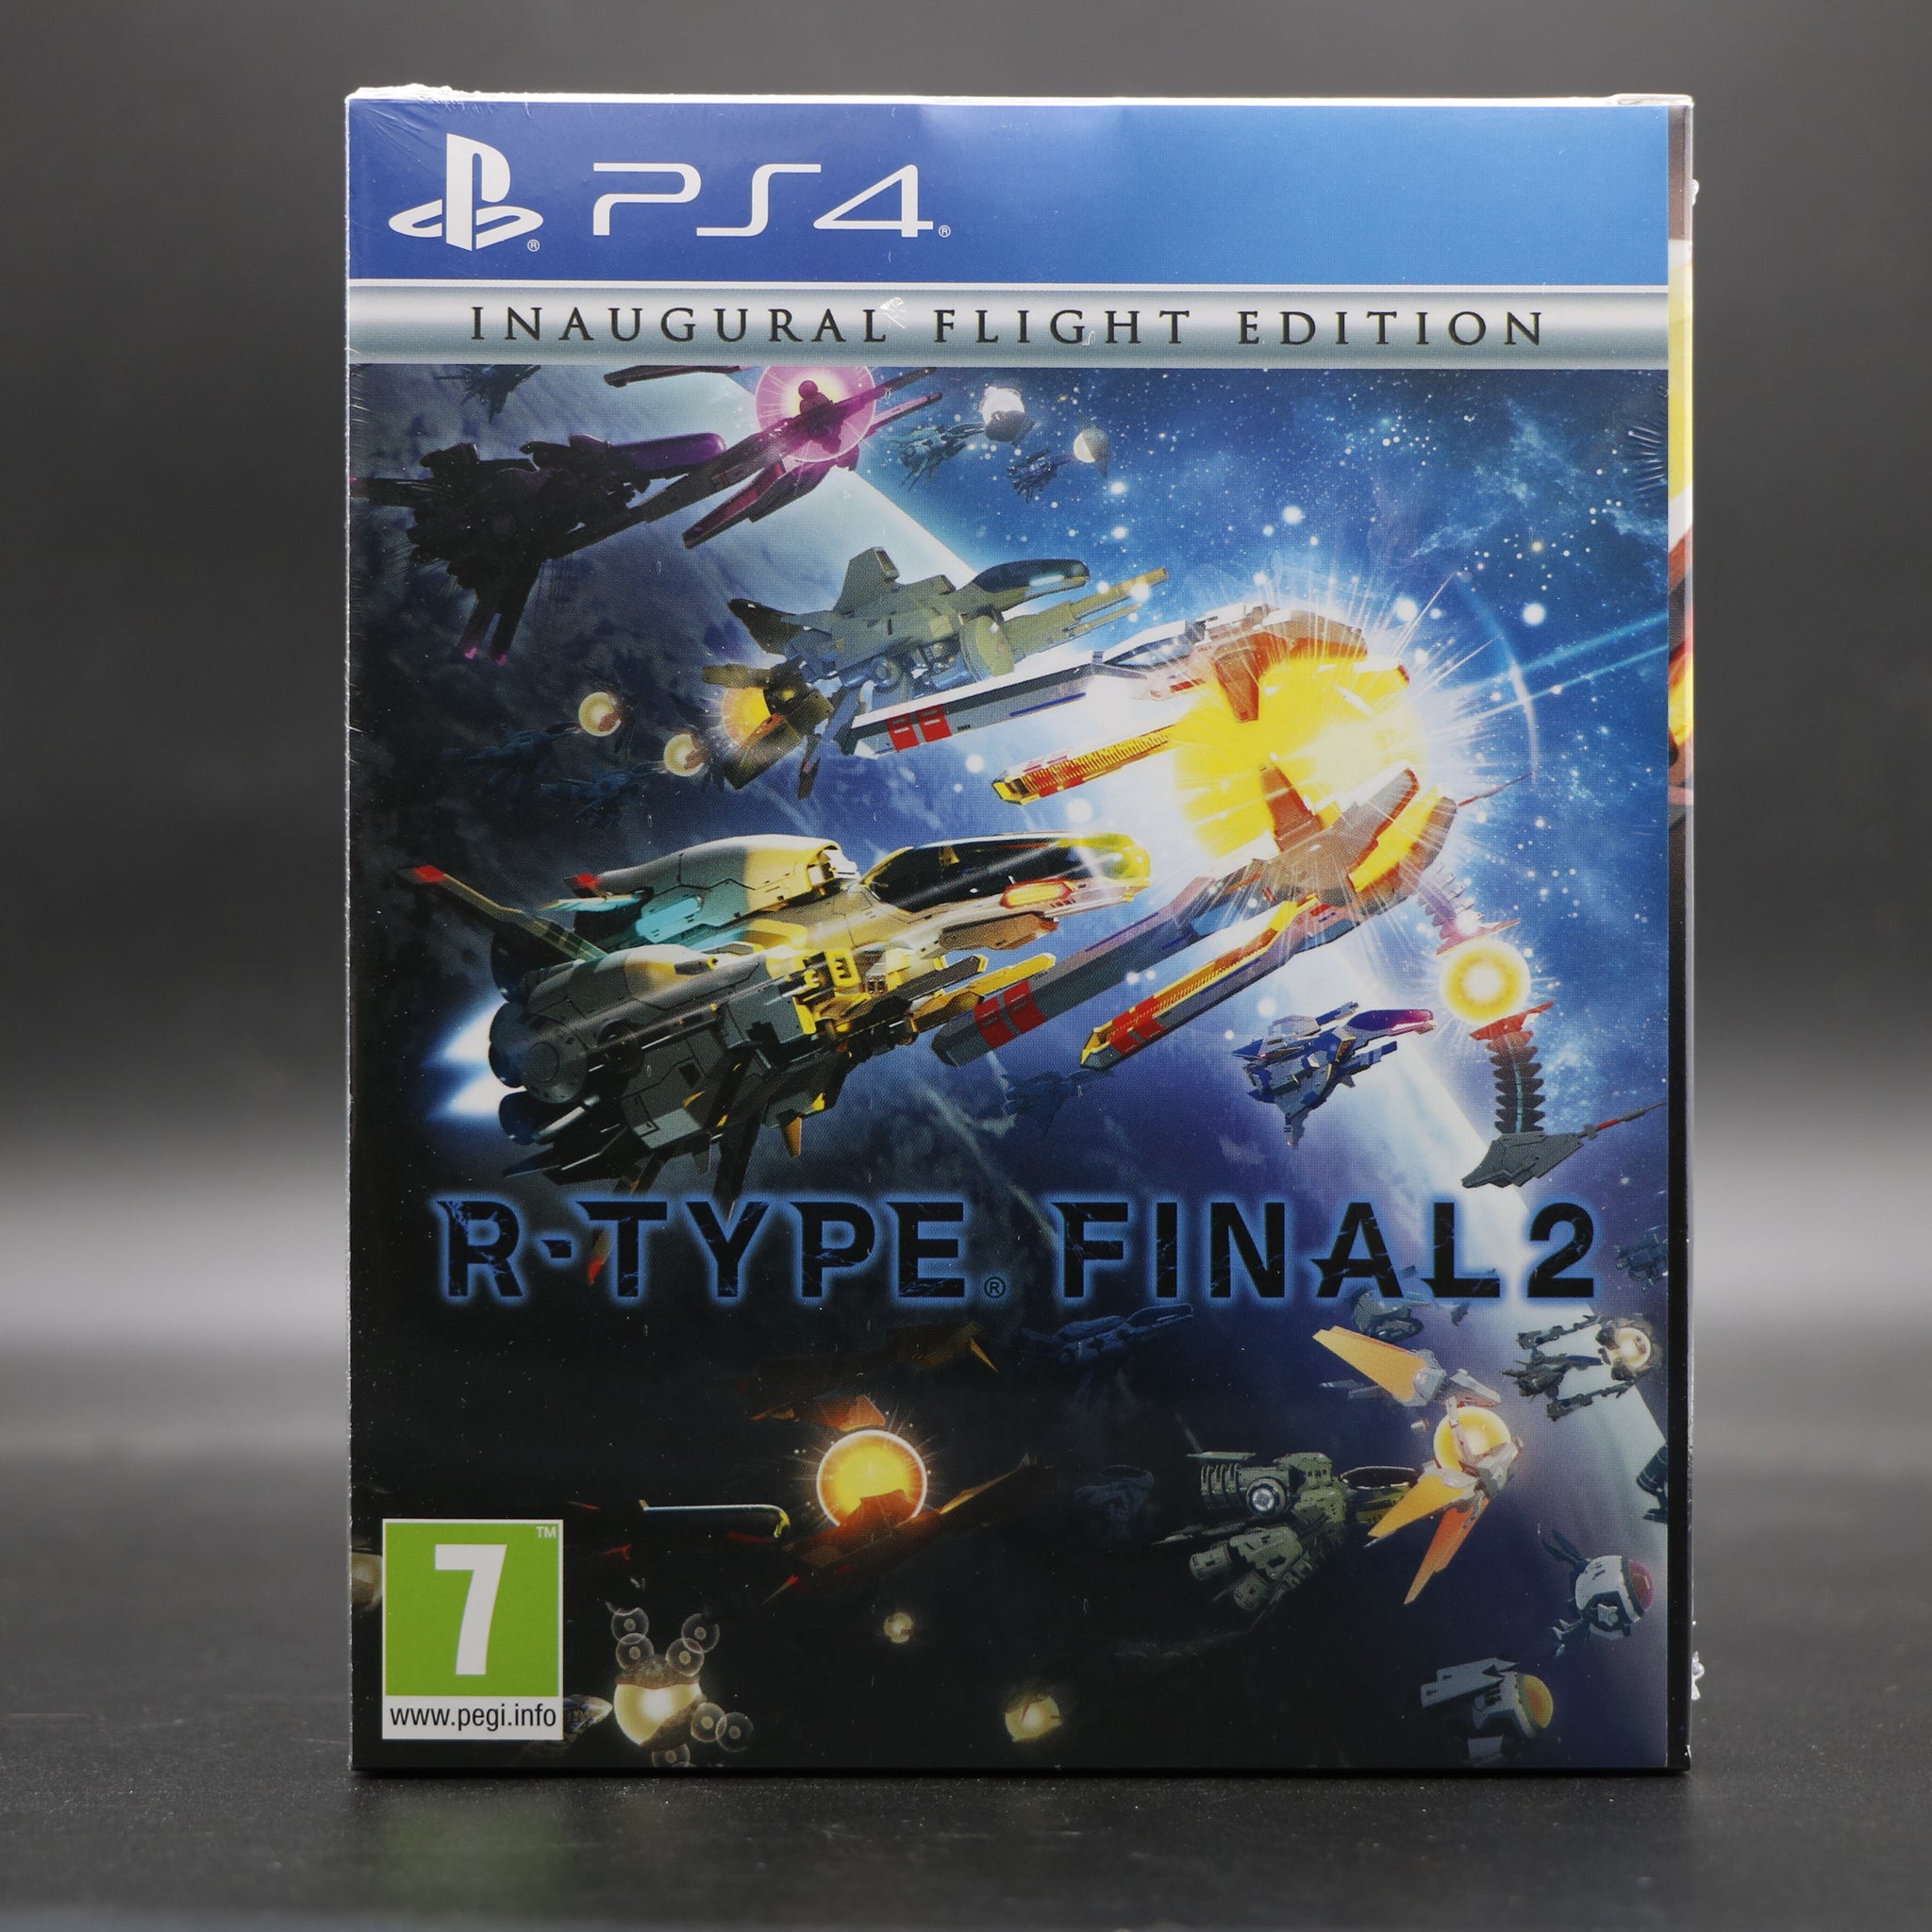 R-Type Final 2 - Inaugural Flight Edition - Sony PS4 Game - New & Sealed